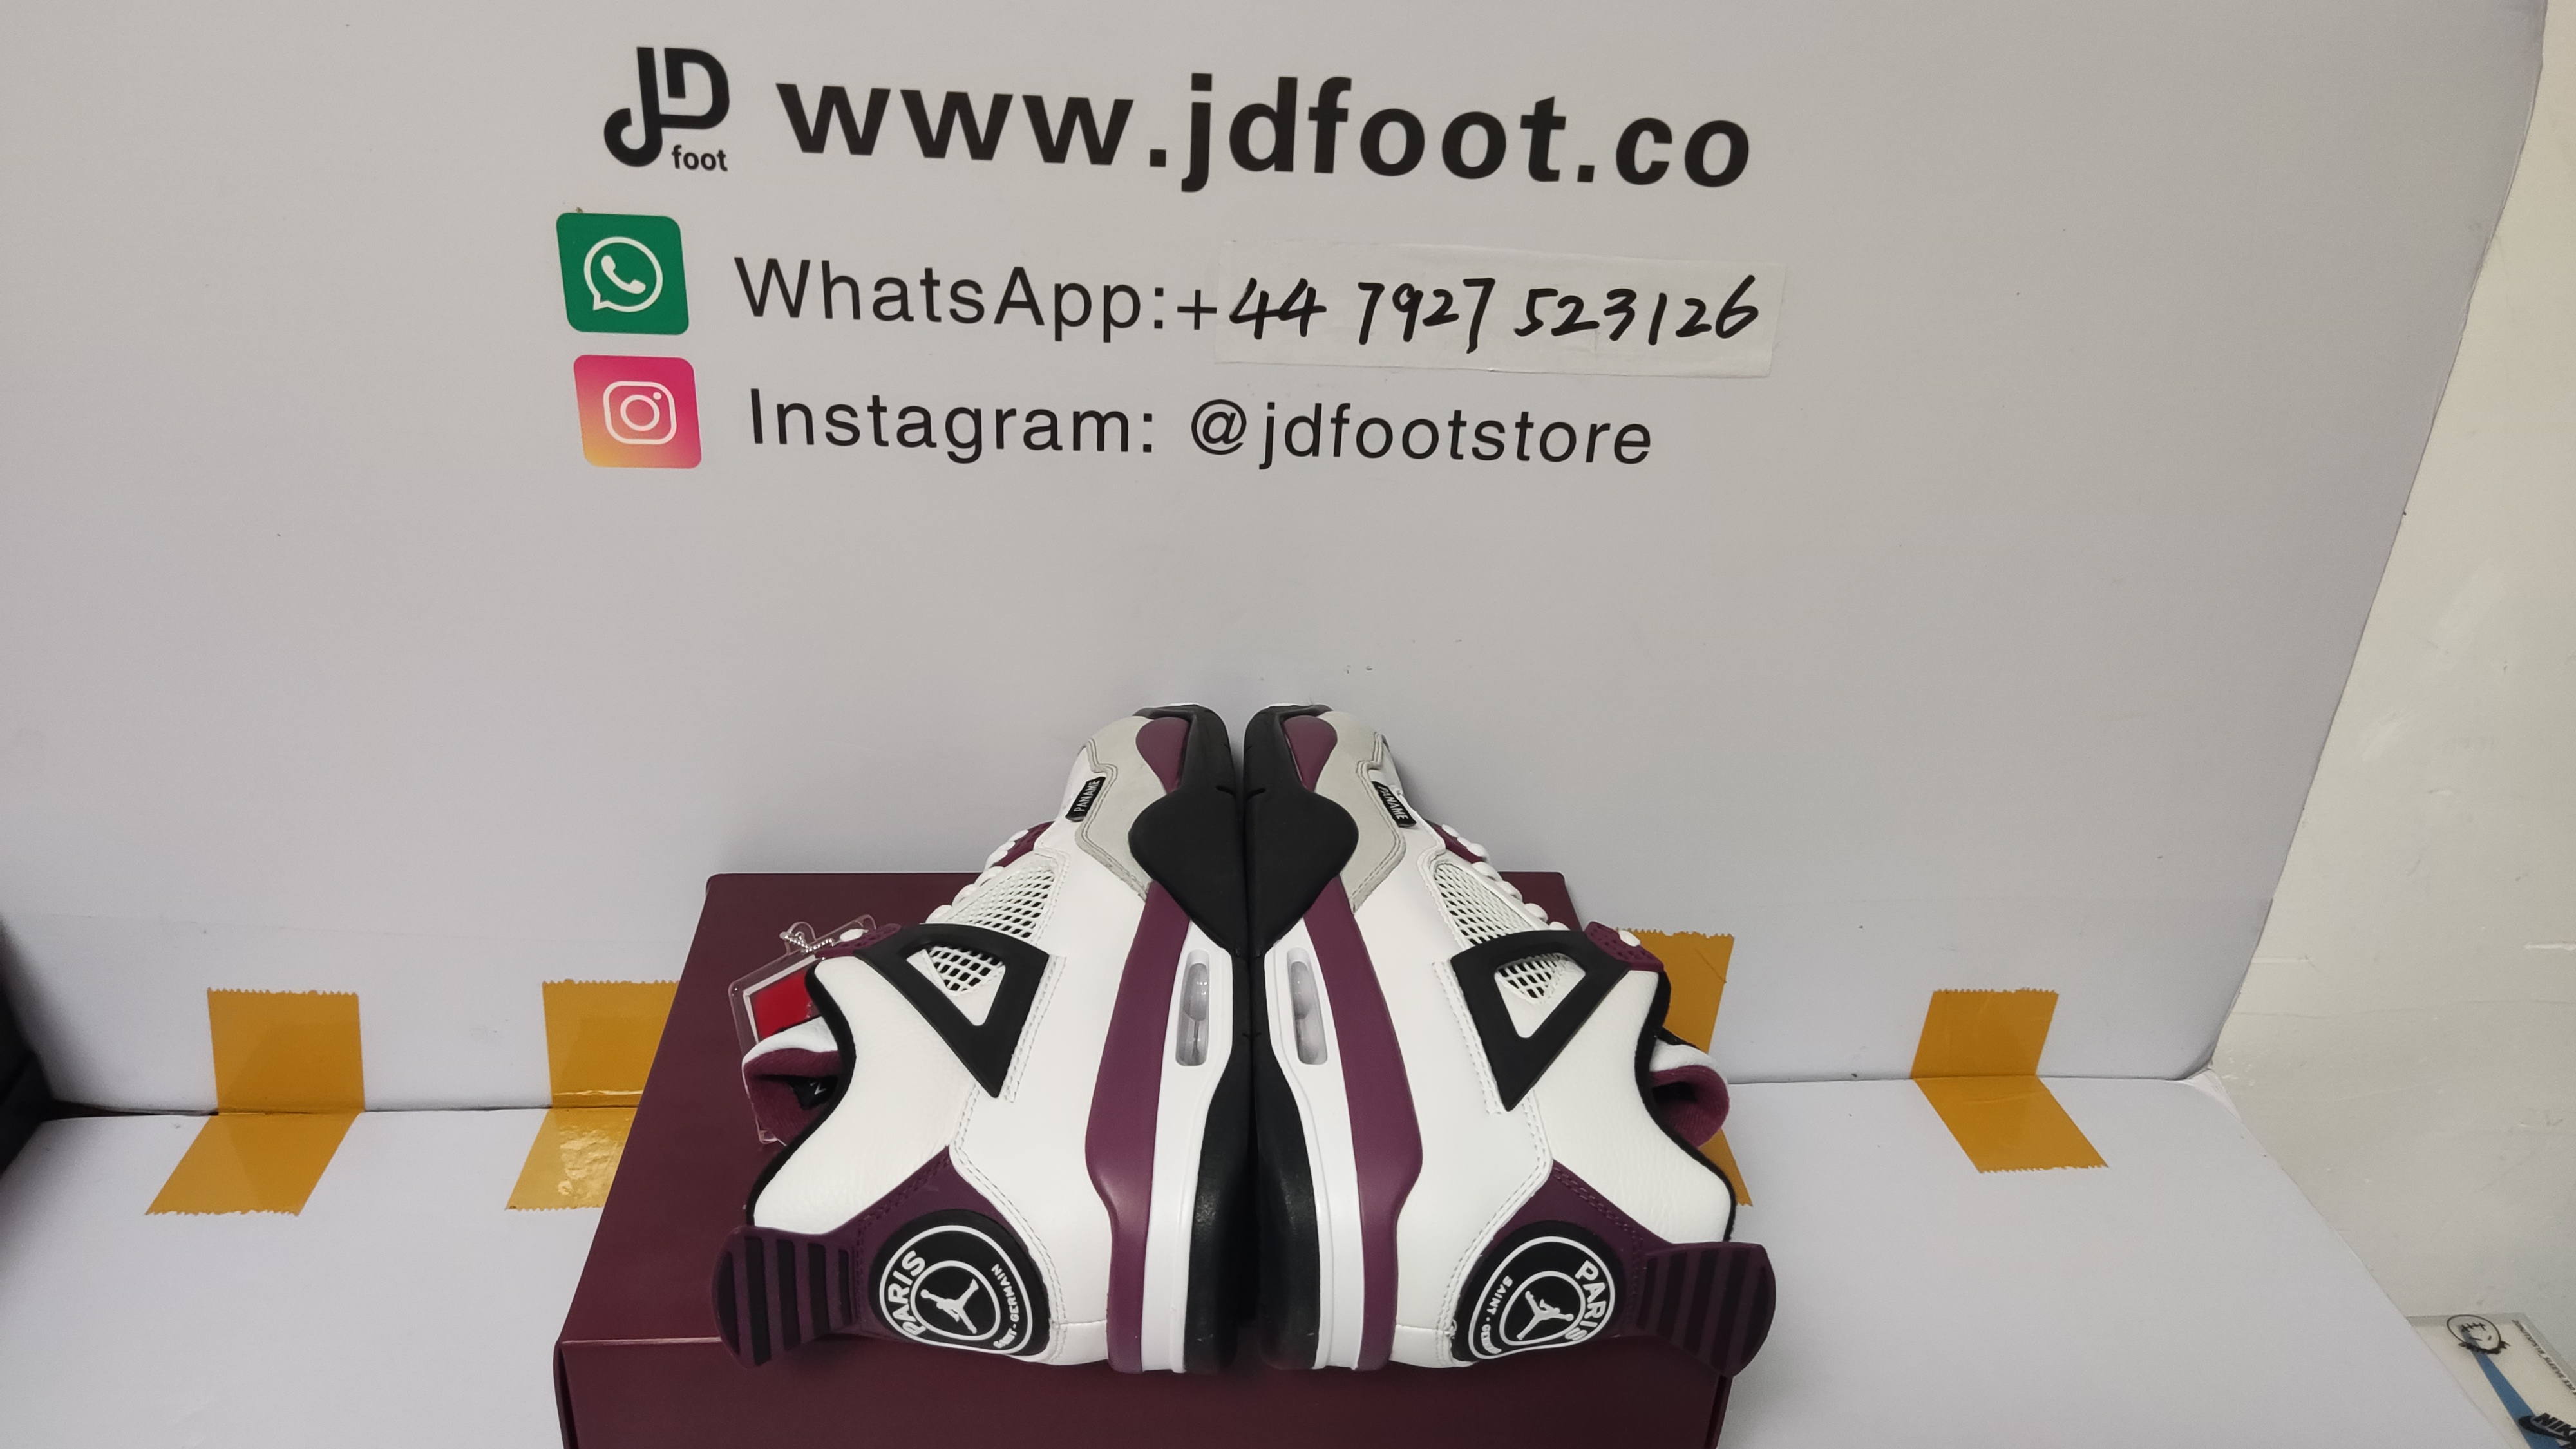 jdfoot